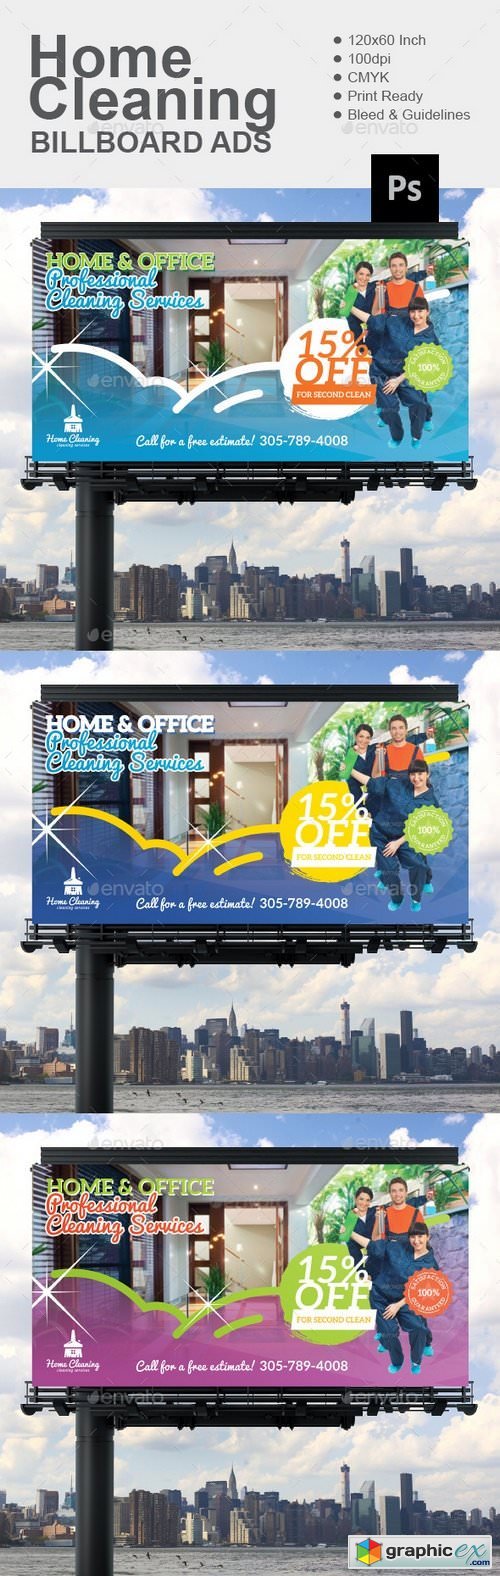 Home Cleaning Billboard